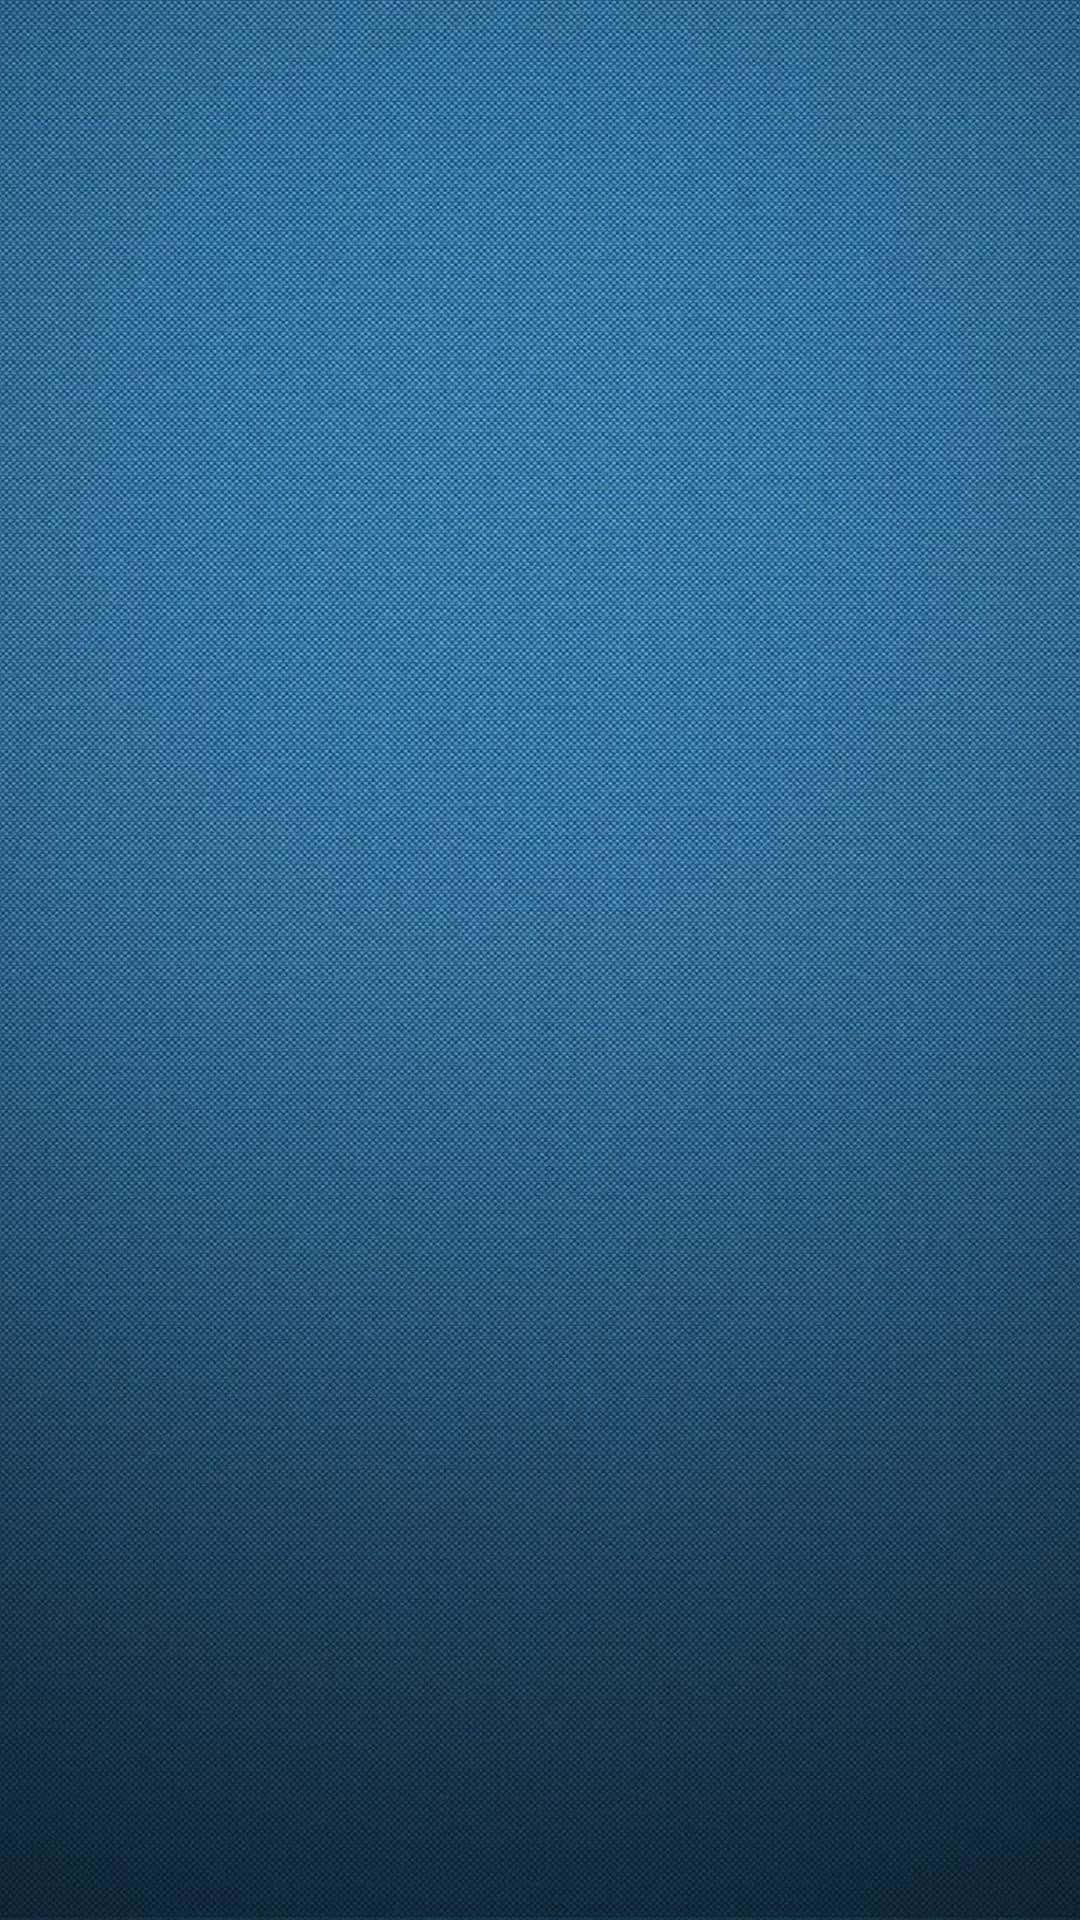 Navy Solid Blue Iphone Wallpaper